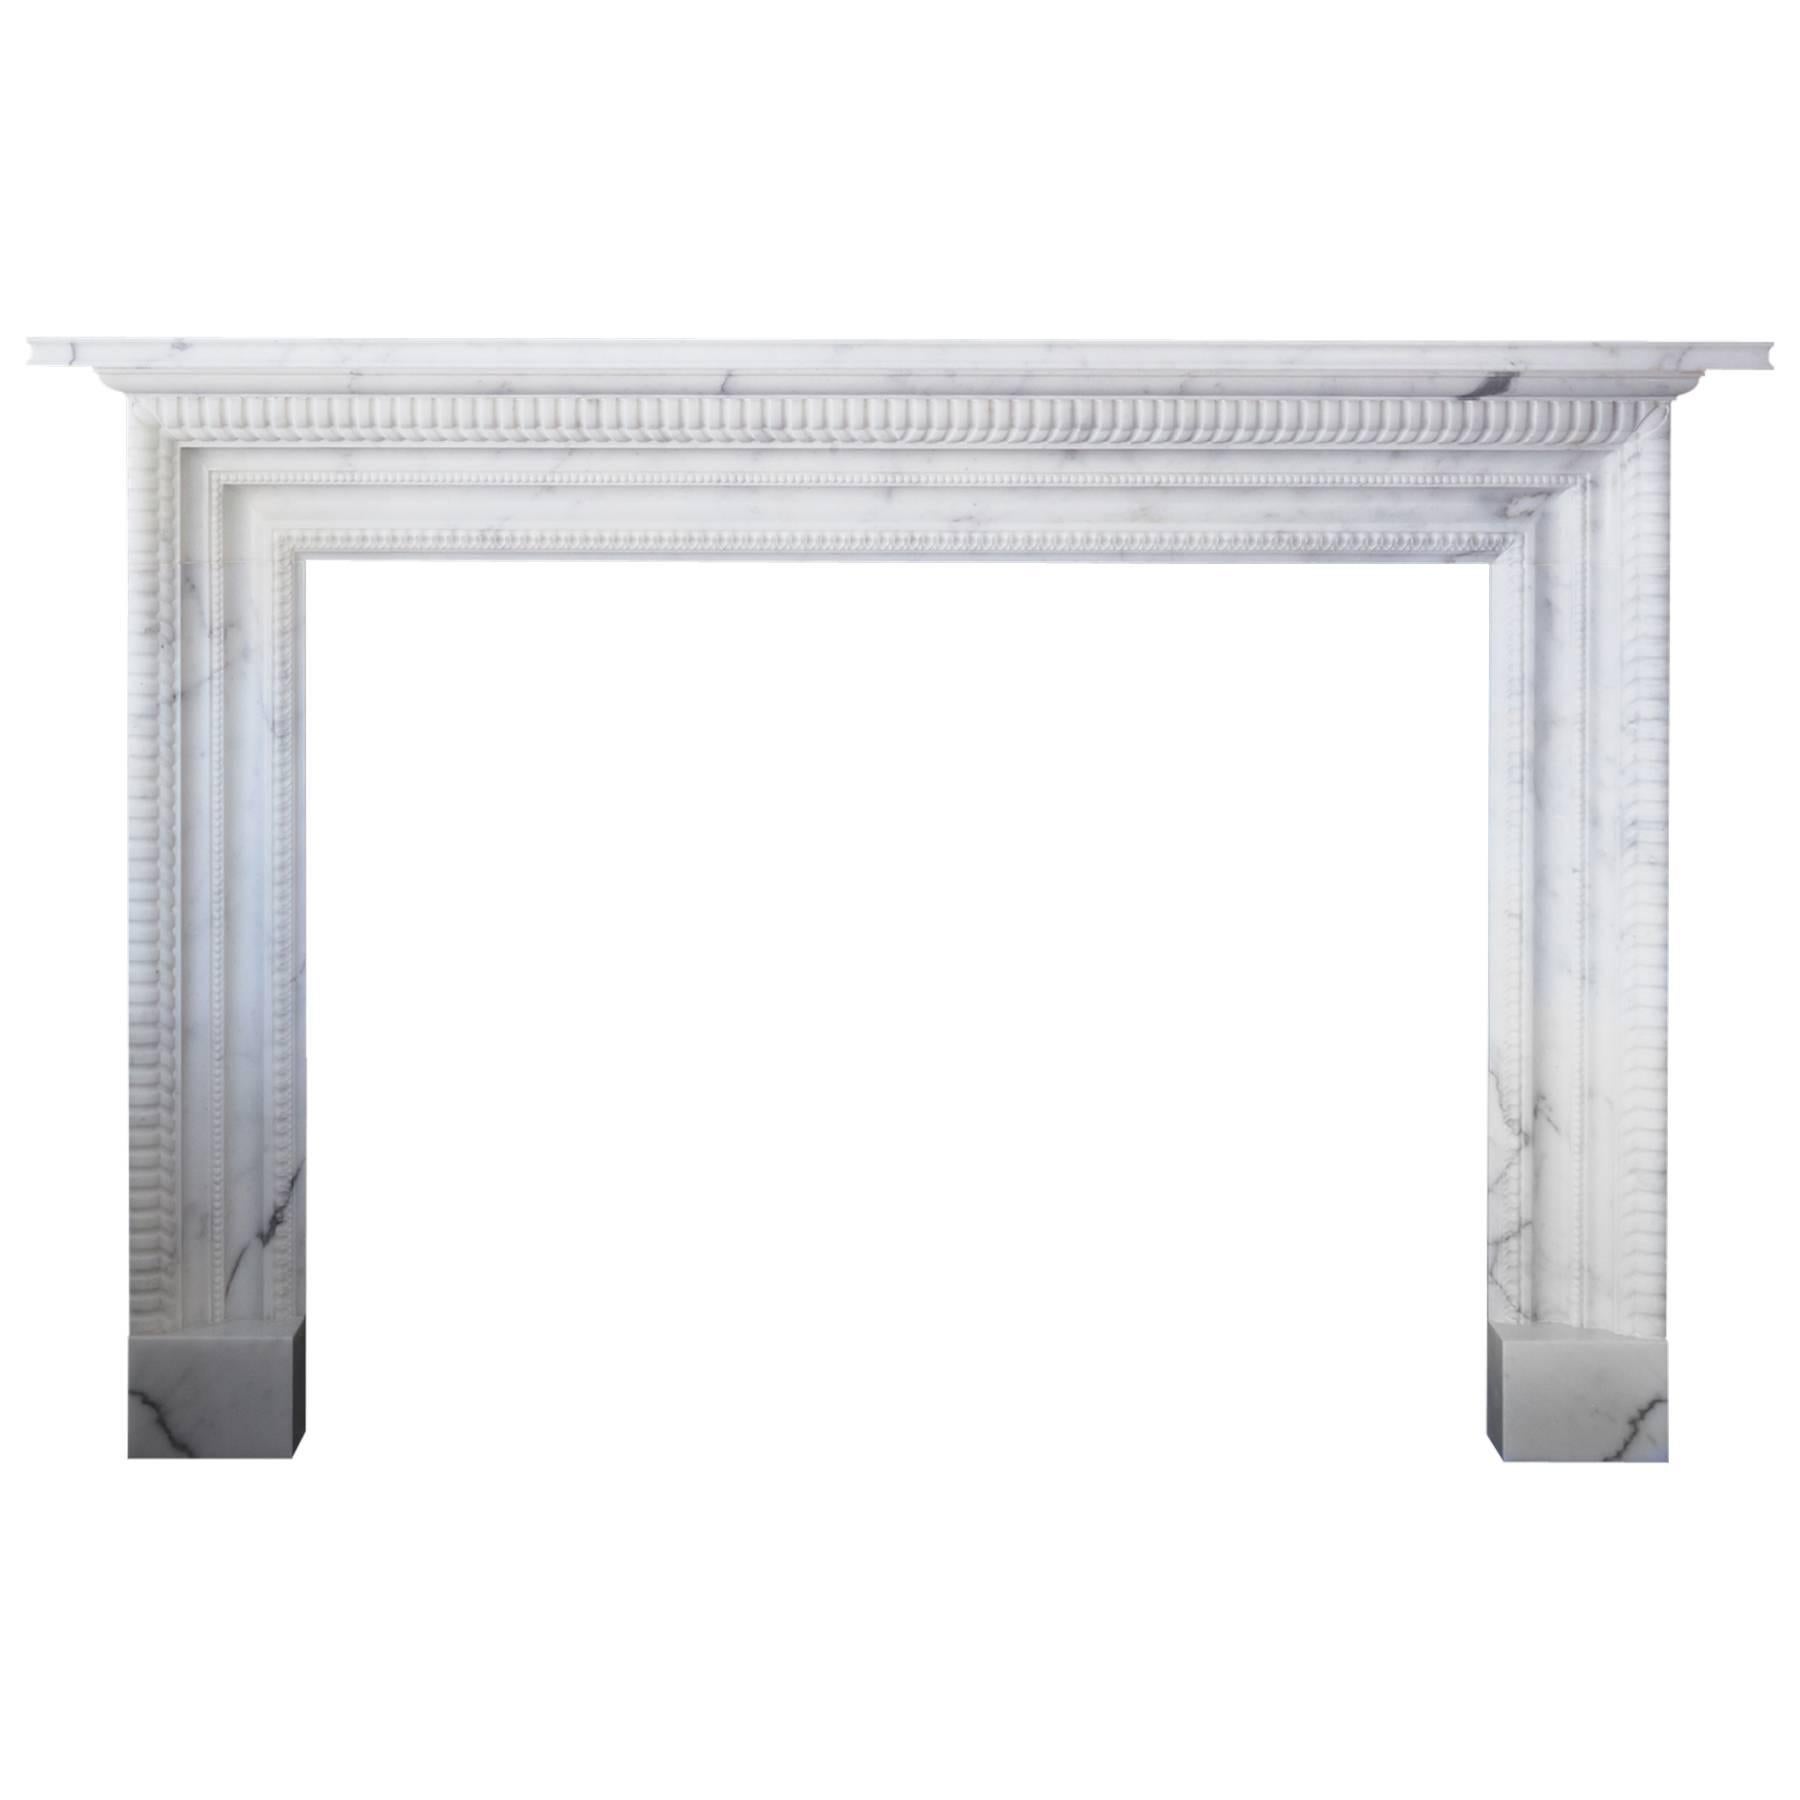 Contemporary Baroque Reproduction Mantel in Statuary Marble